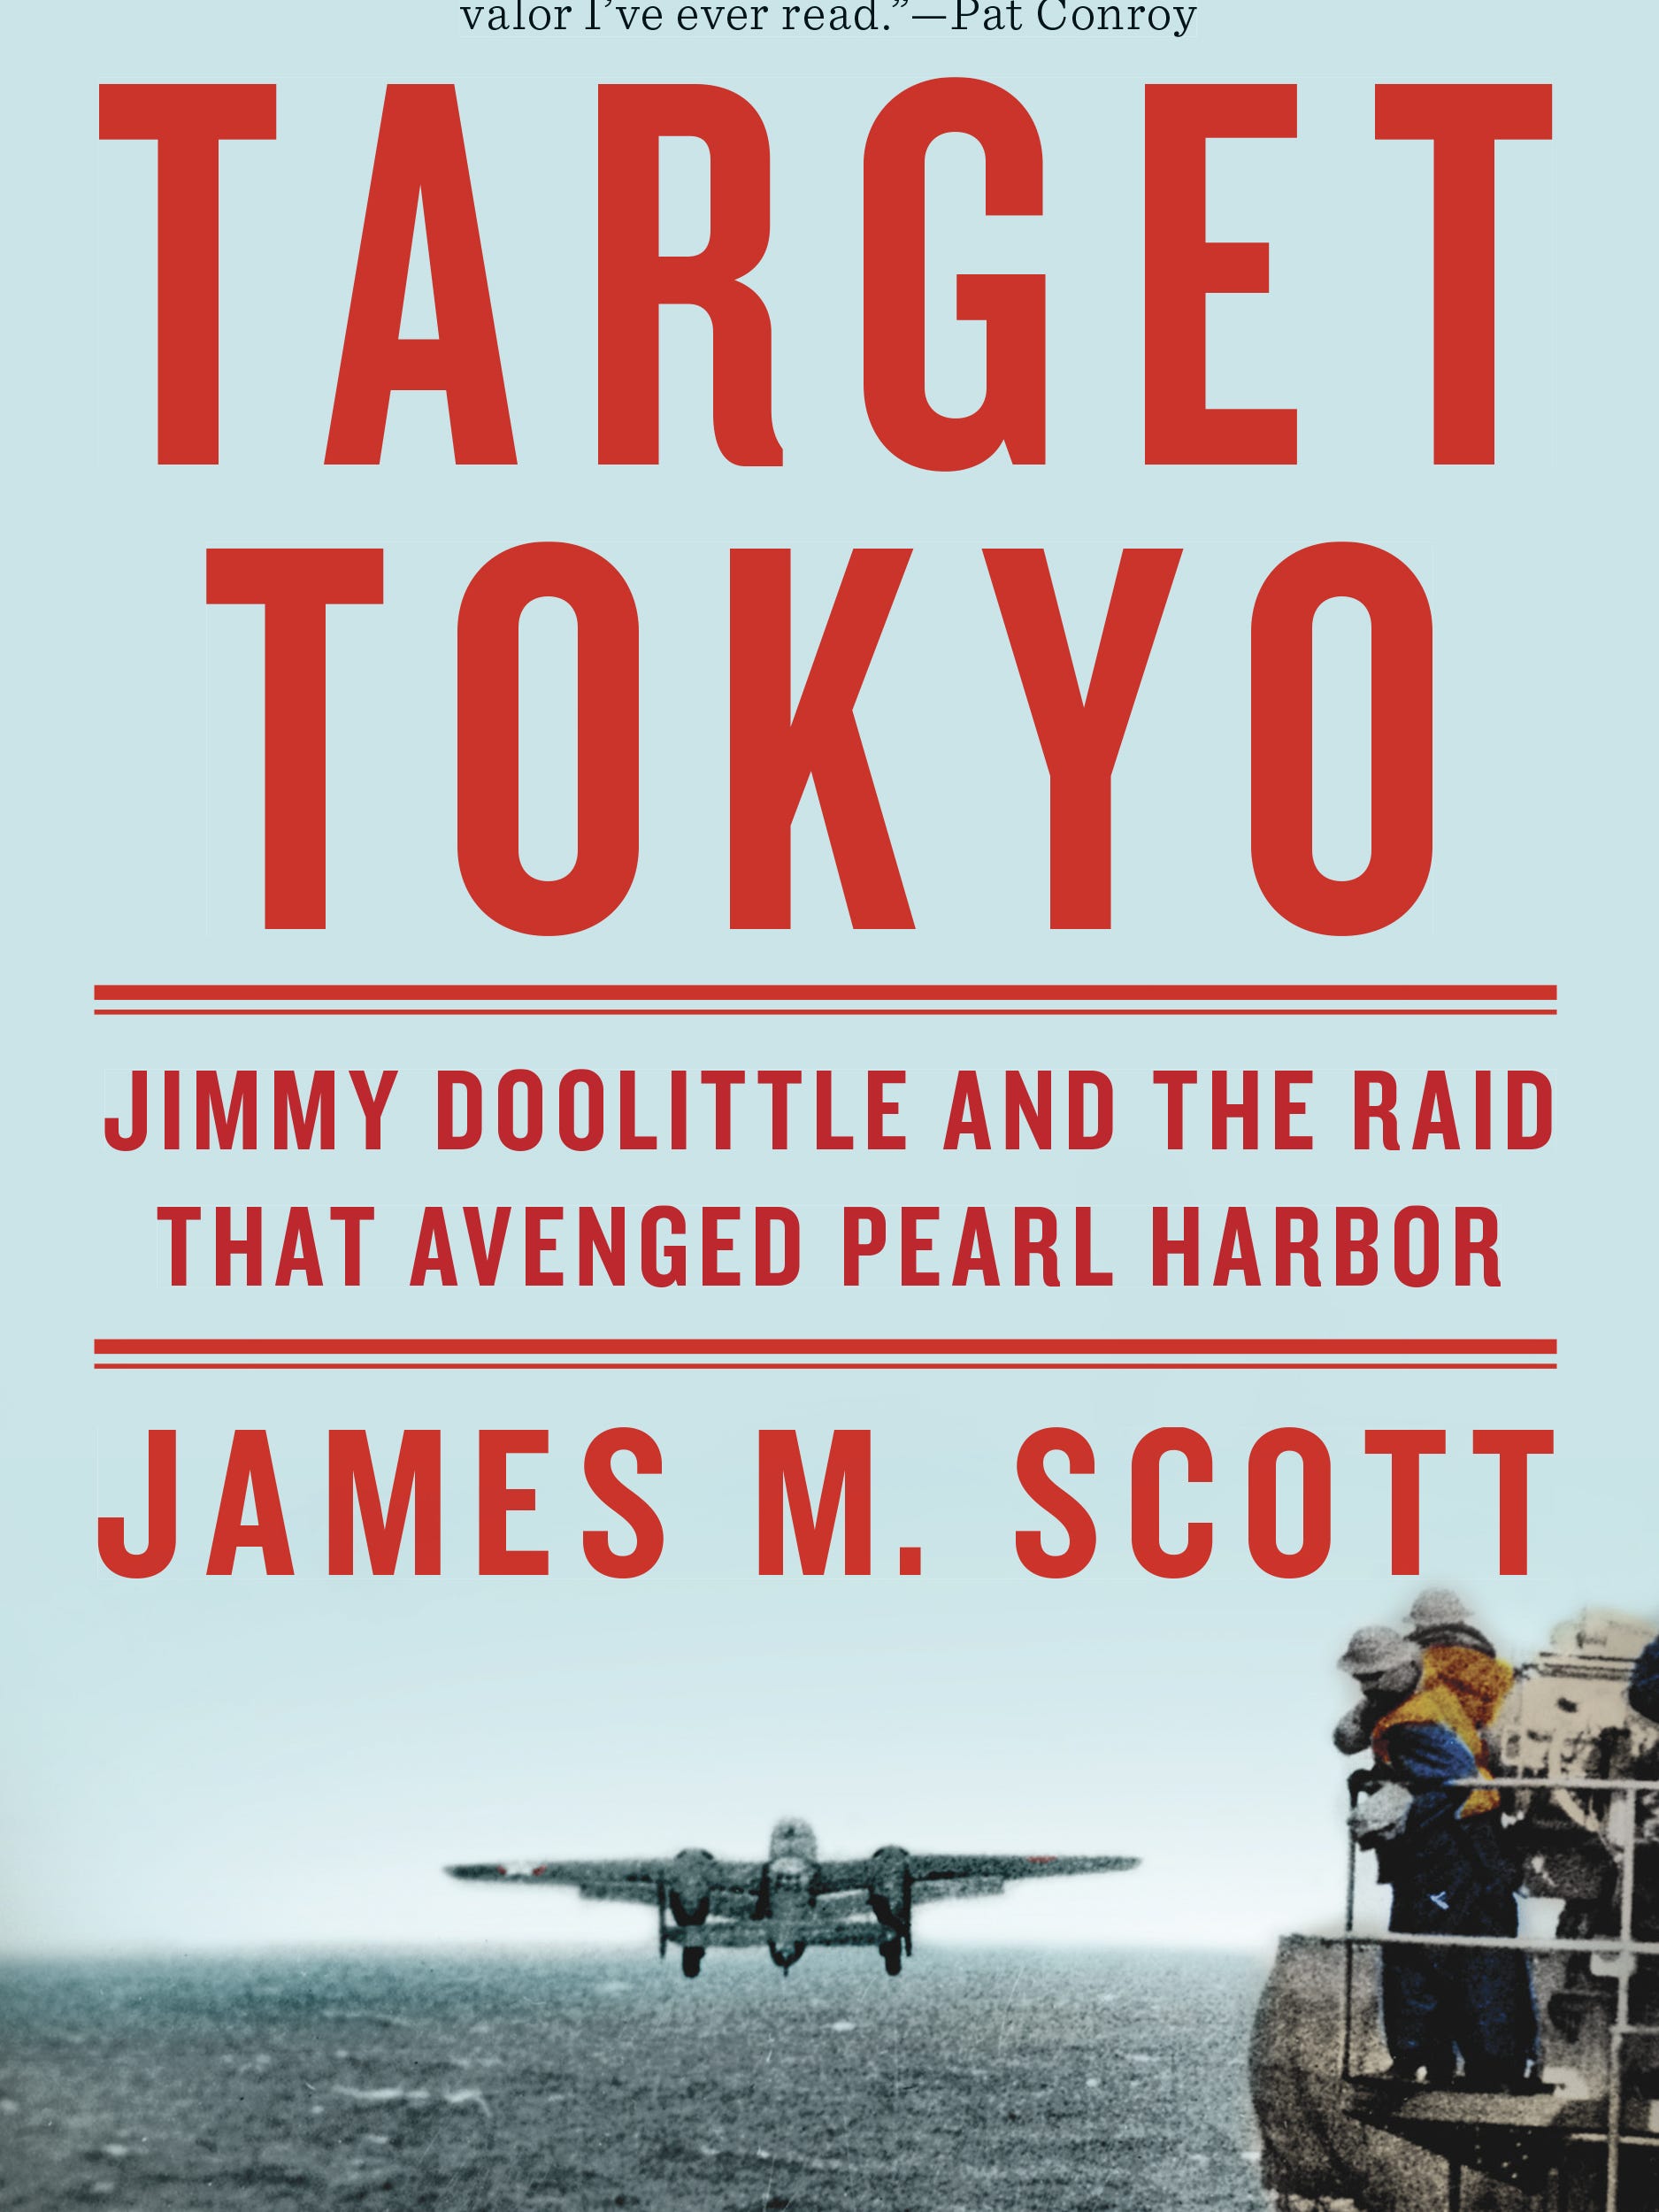 Book On Tokyo Raid Is Right On Target